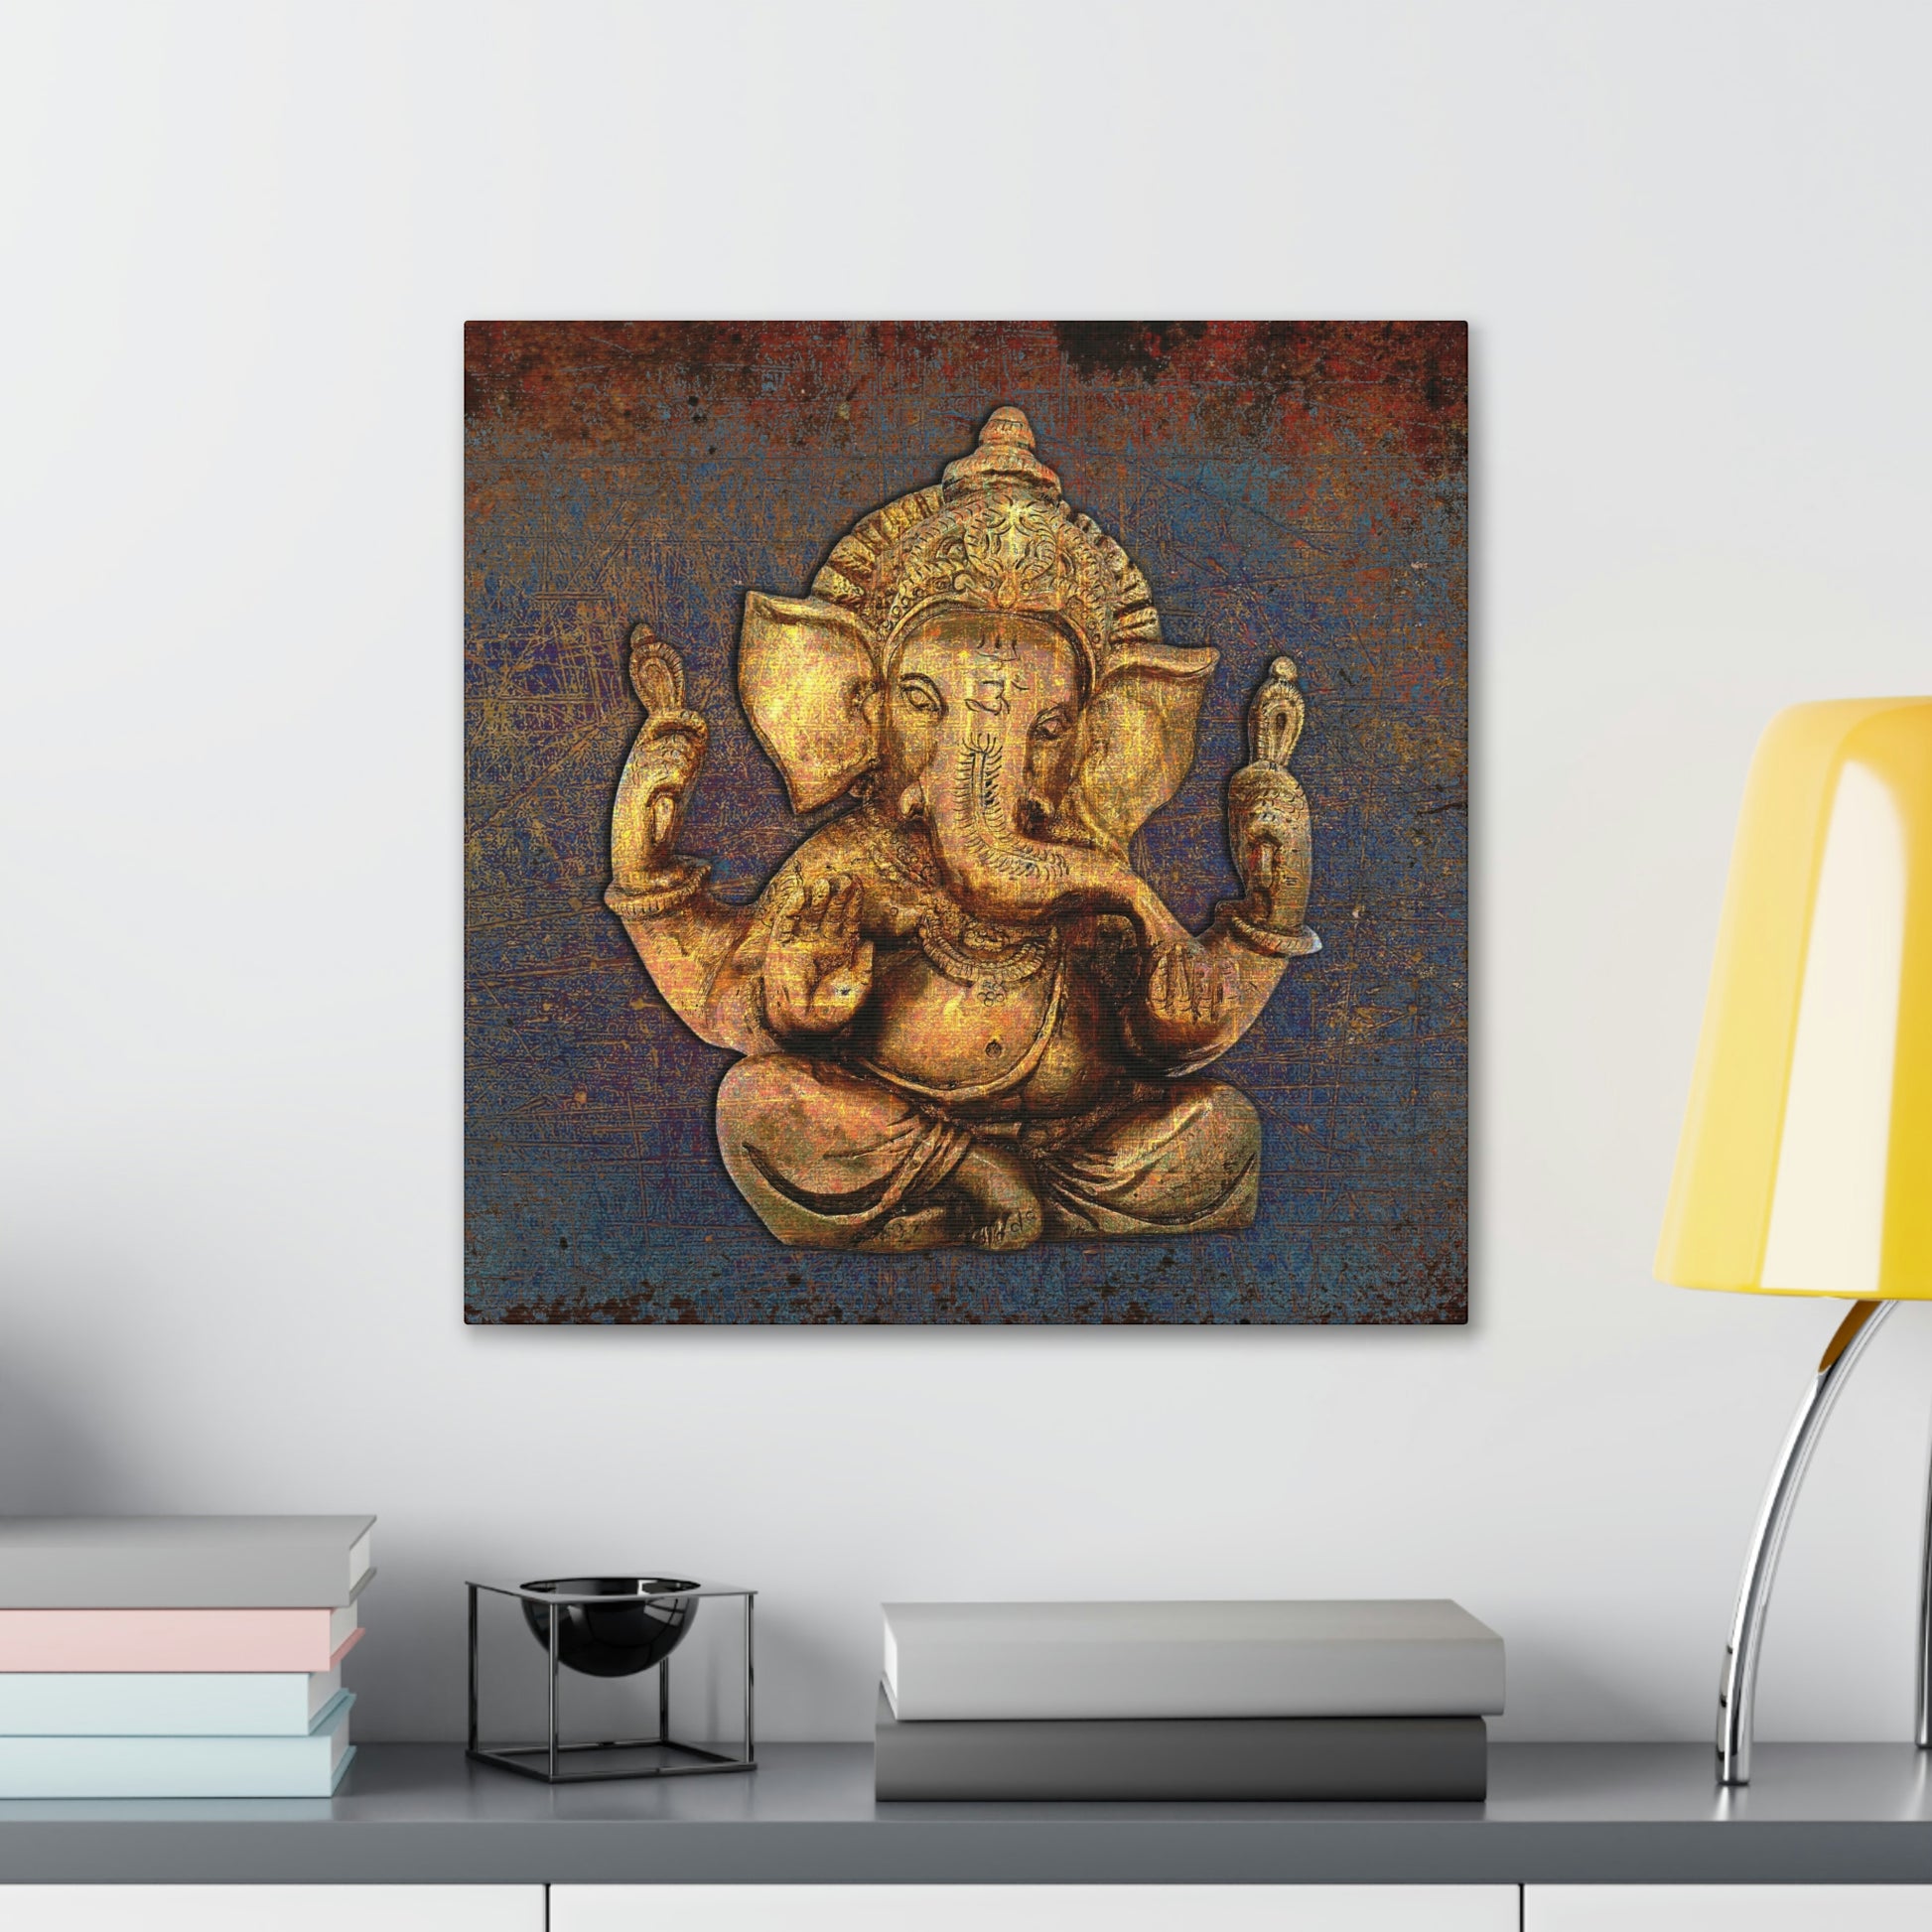 Ganesha on a Distressed Purple and Orange Background Printed on Unframed Stretched Canvas hung